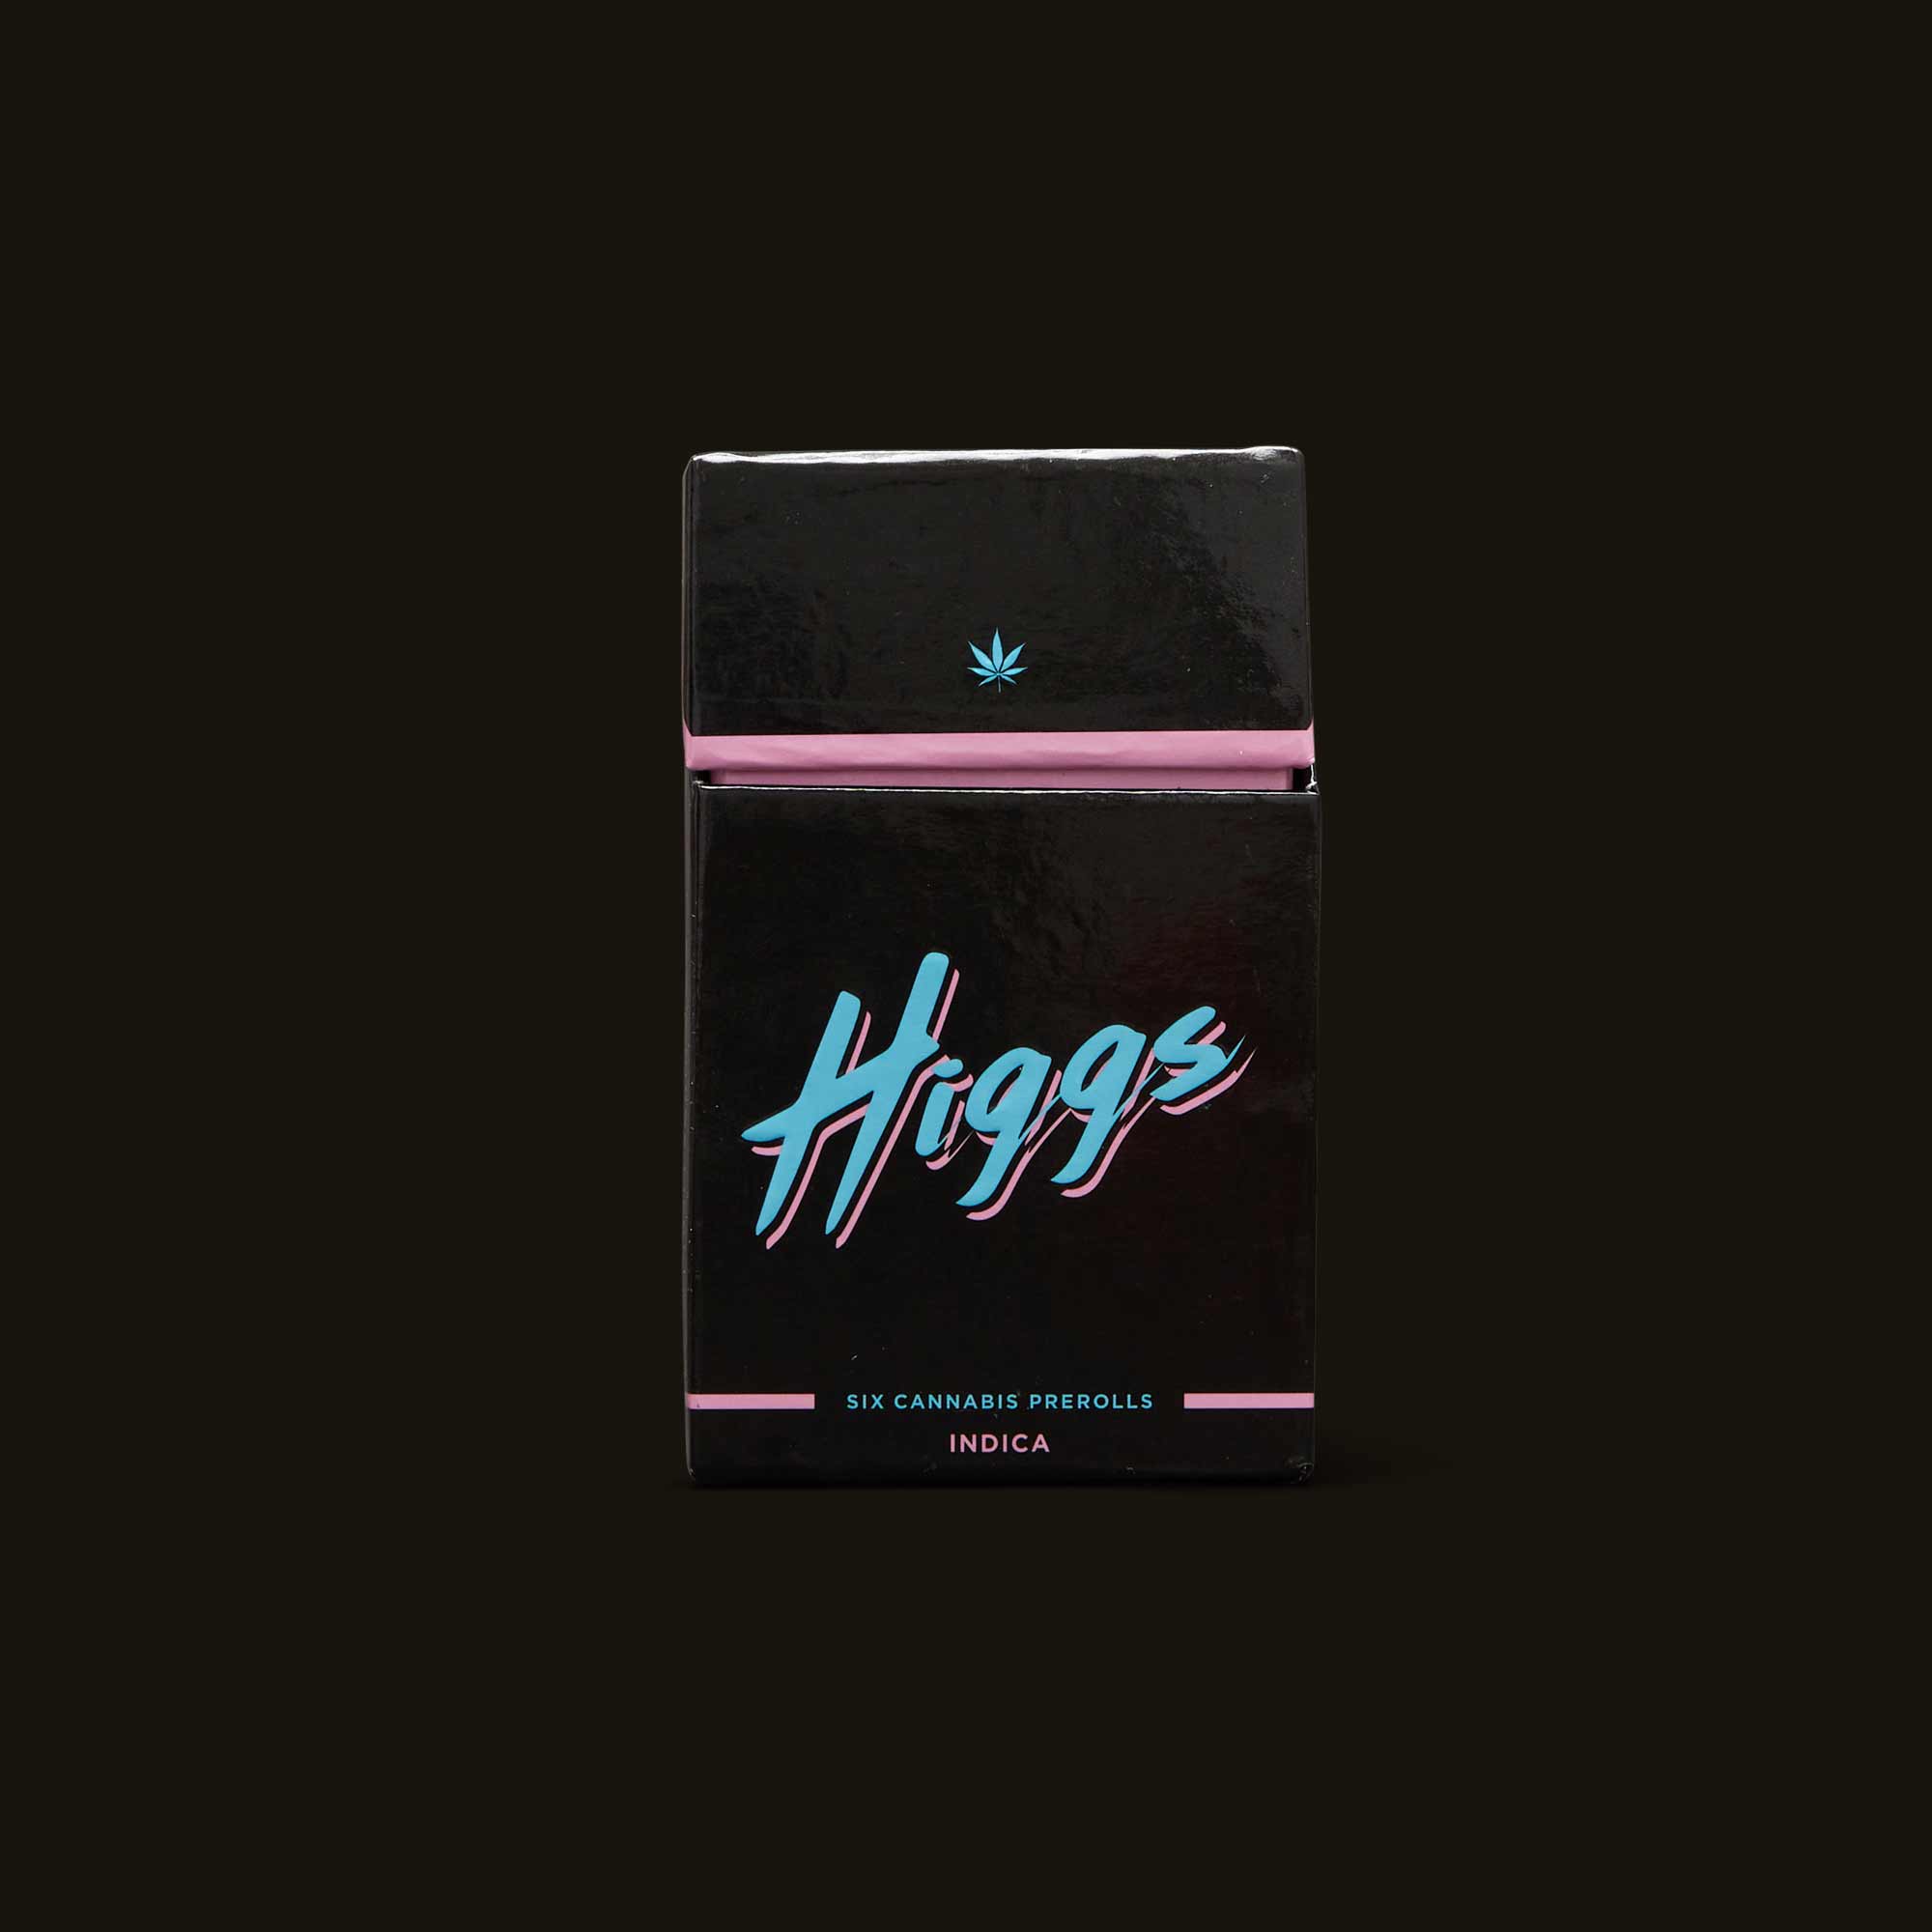 Higgs-Indica-Preroll-Pack-Front-CA-1777-796518